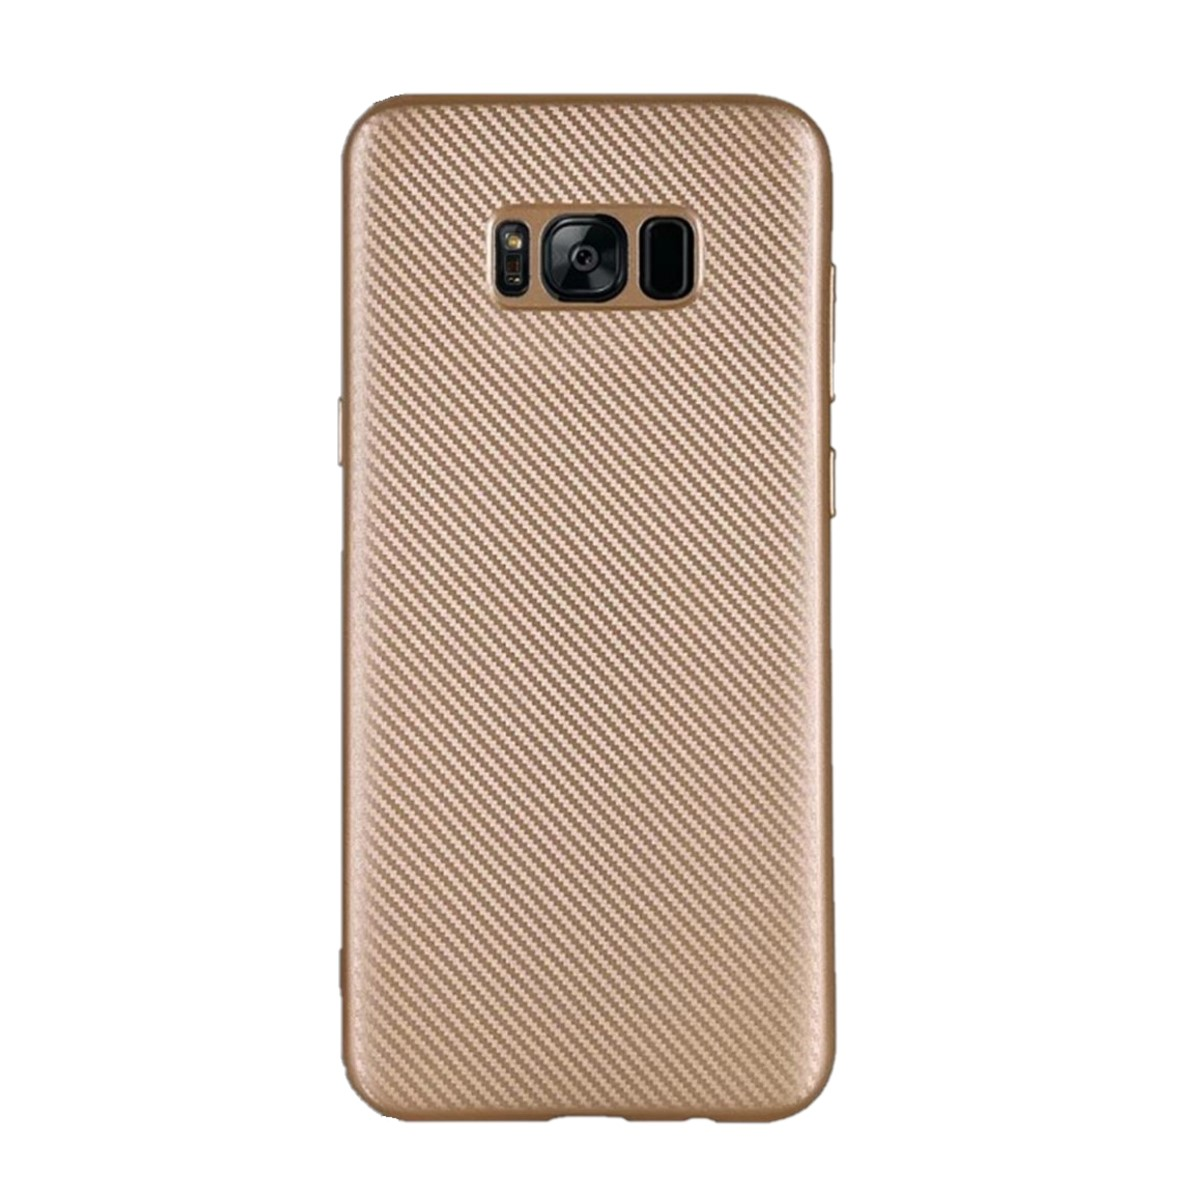 Handycase Backcover, Look, Samsung, Gold Galaxy S8 Plus, Carbon im COVERKINGZ